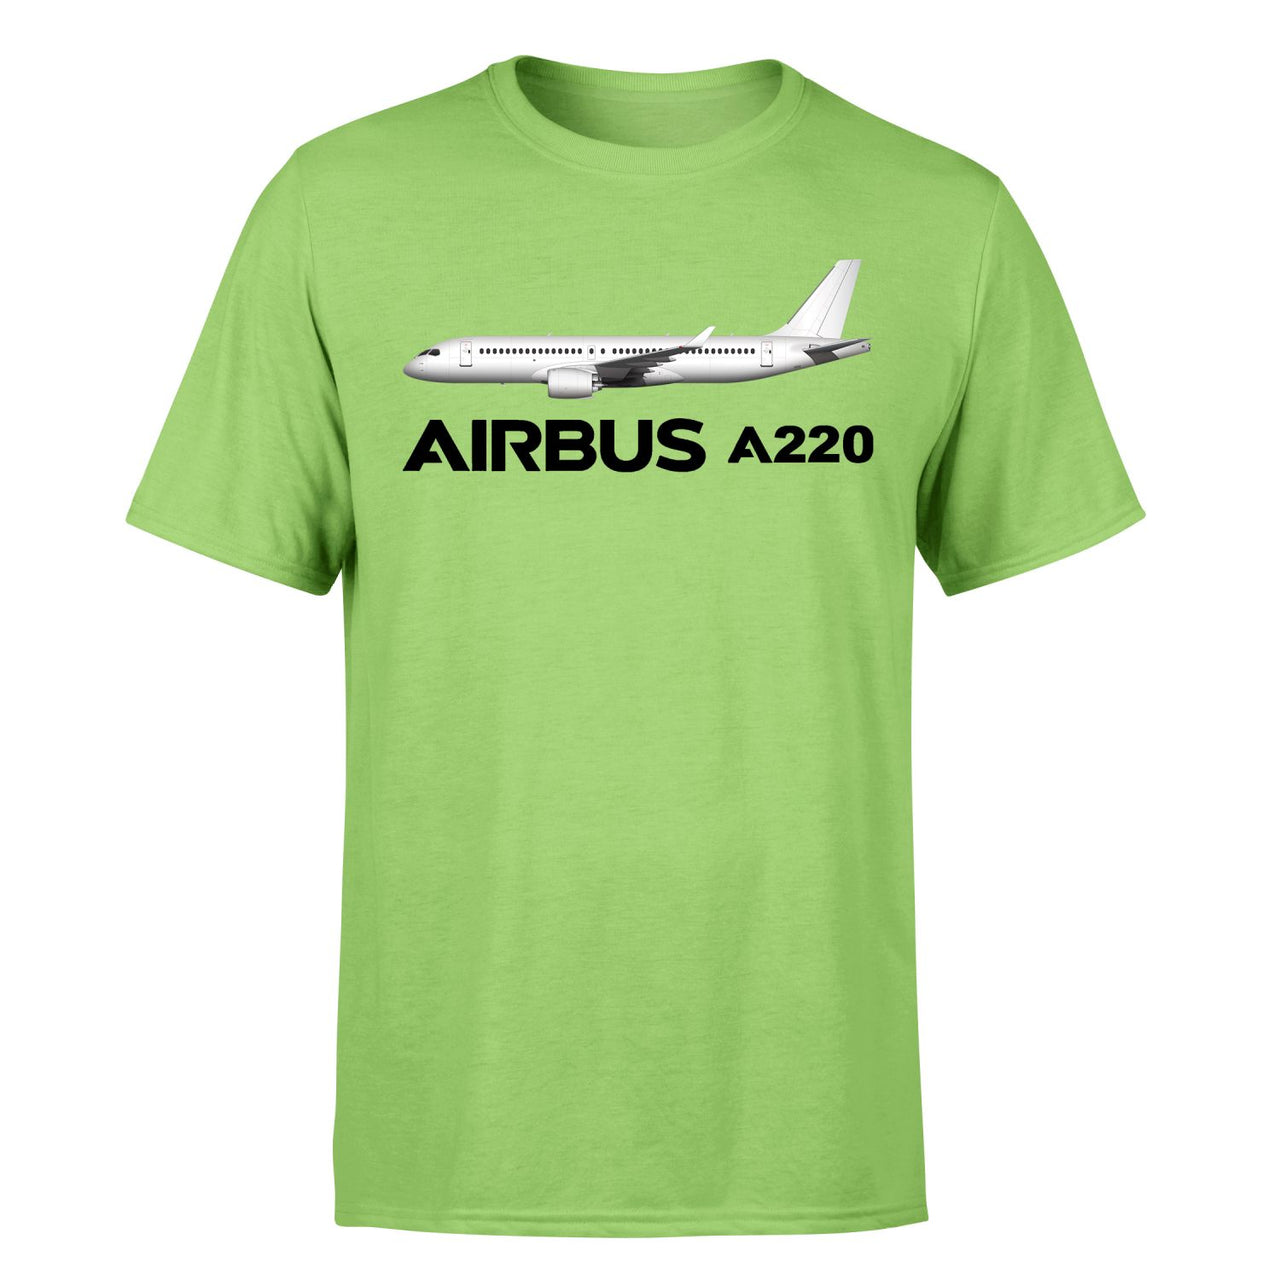 The Airbus A220 Designed T-Shirts